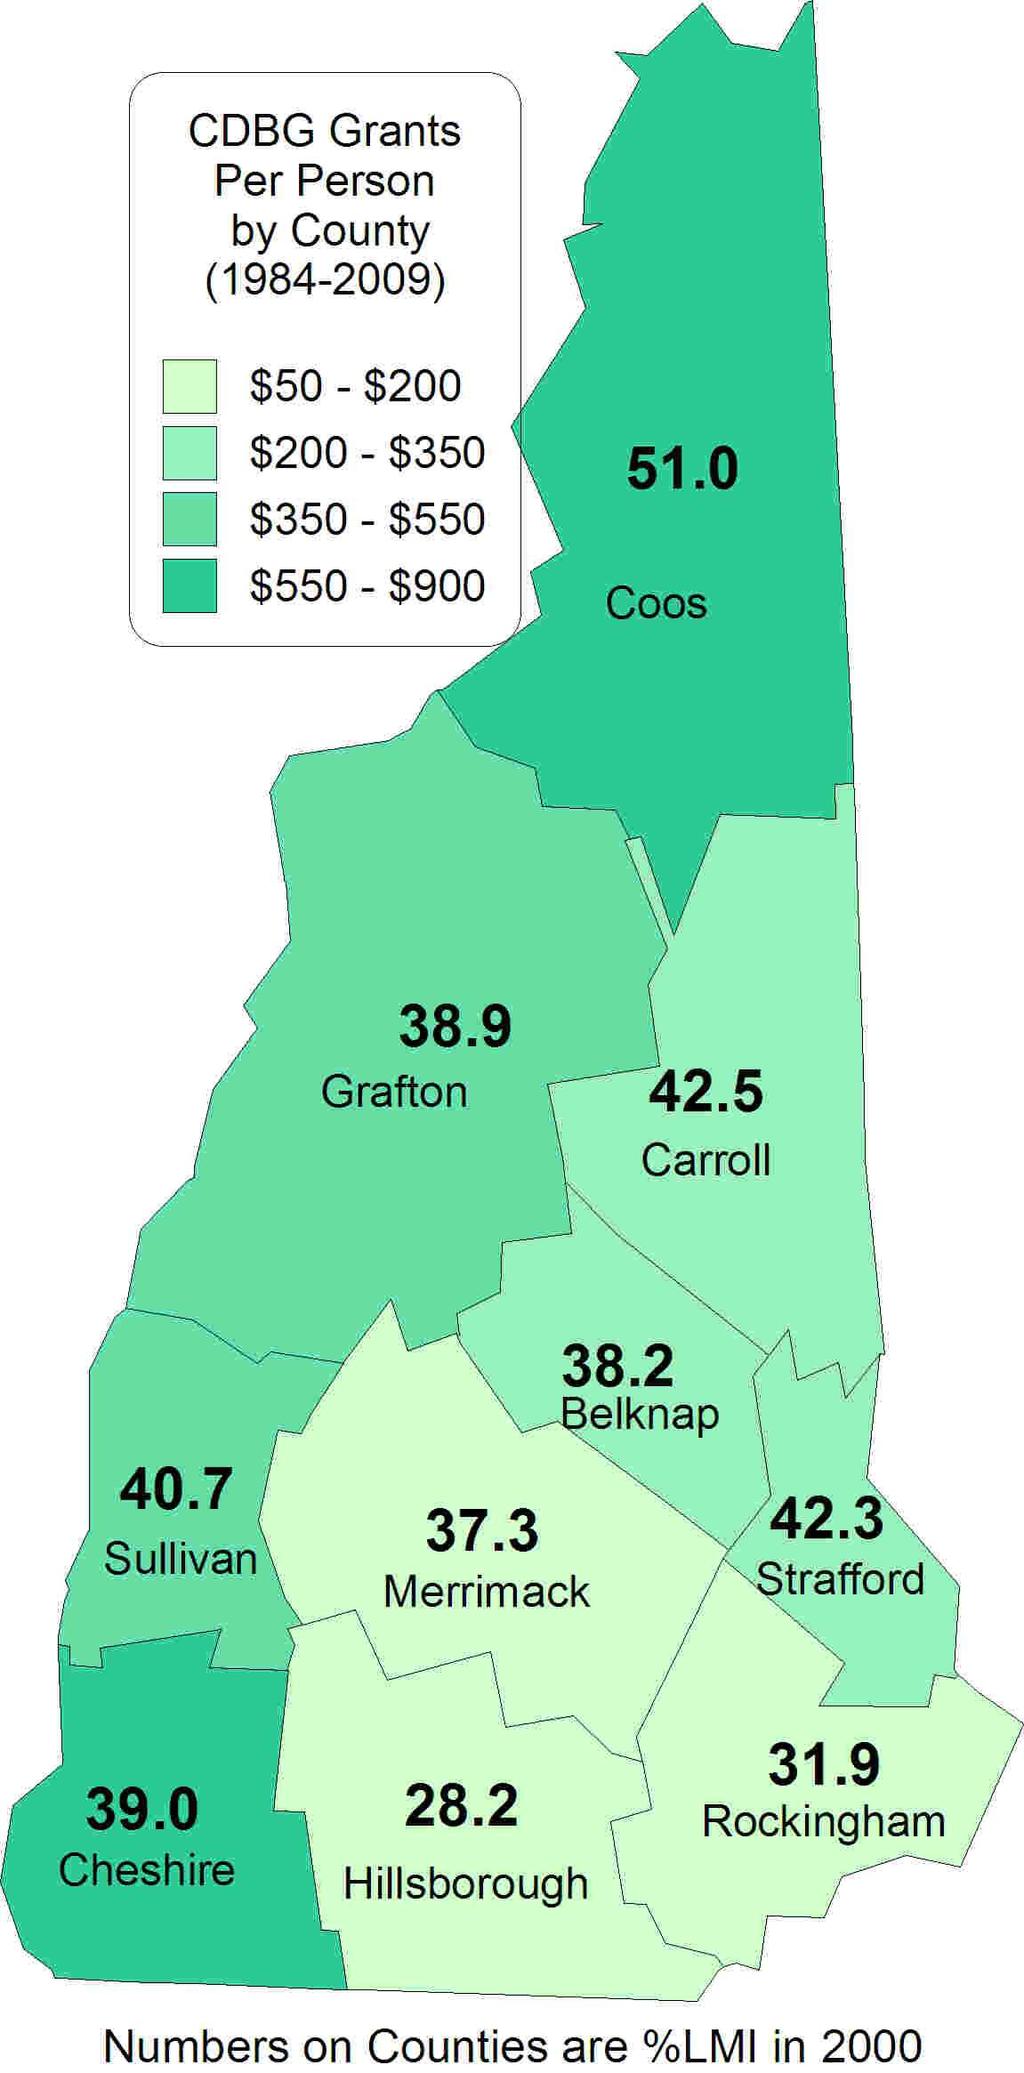 Assessing Community Development: NH s Community Development Block Grant Program 15 Coos County has the highest amount of CDBG grant awards per person, but also the highest percentage of low- to